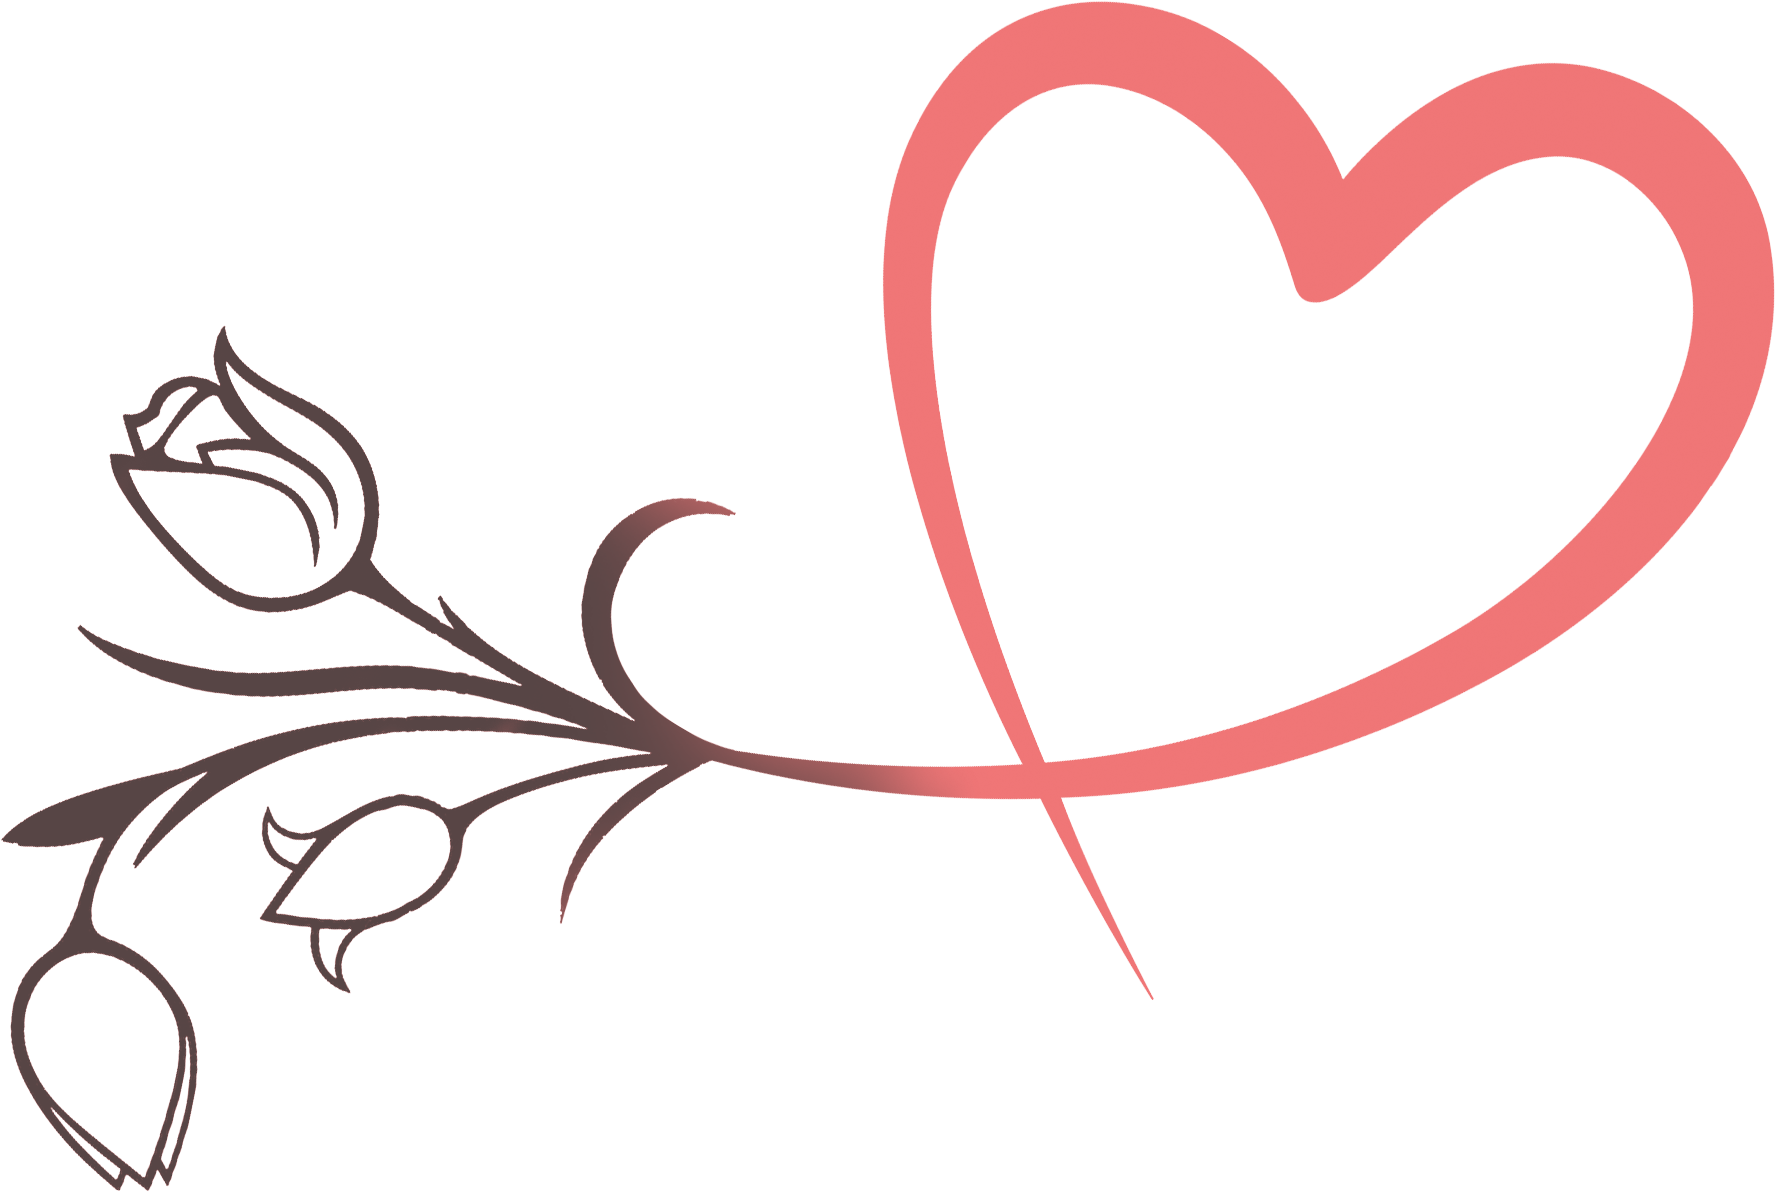 Heat clipart wedding heart design. Image of rings 